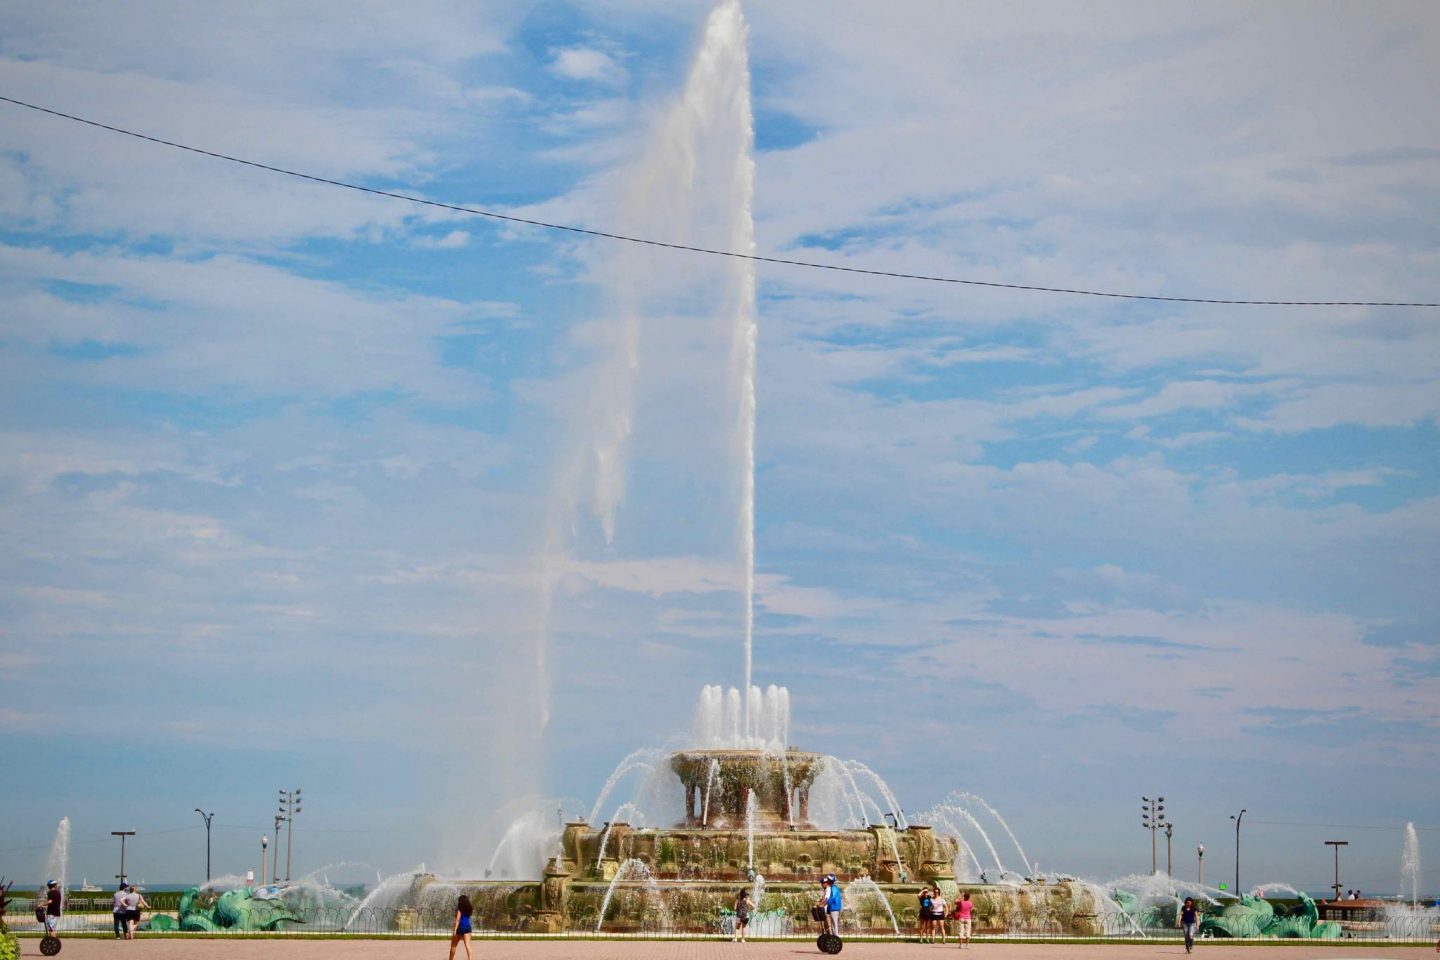 Chicago Buckingham Fountain ... 3-day Chicago Itinerary ... The Spectacular Adventurer